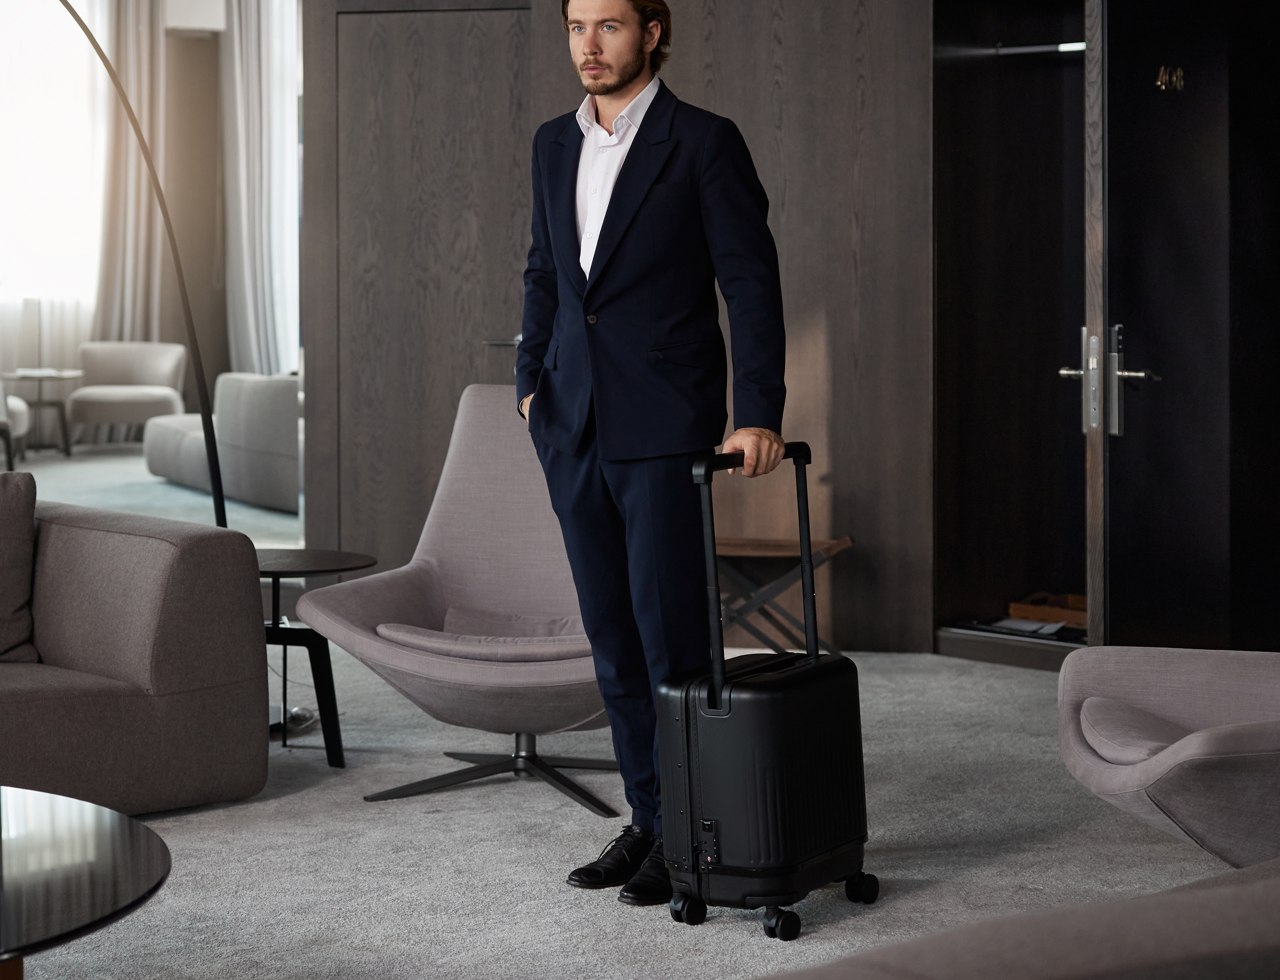 ‘Incredibly clever’ telescopic luggage bag can expand or contract based on how much you’re packing